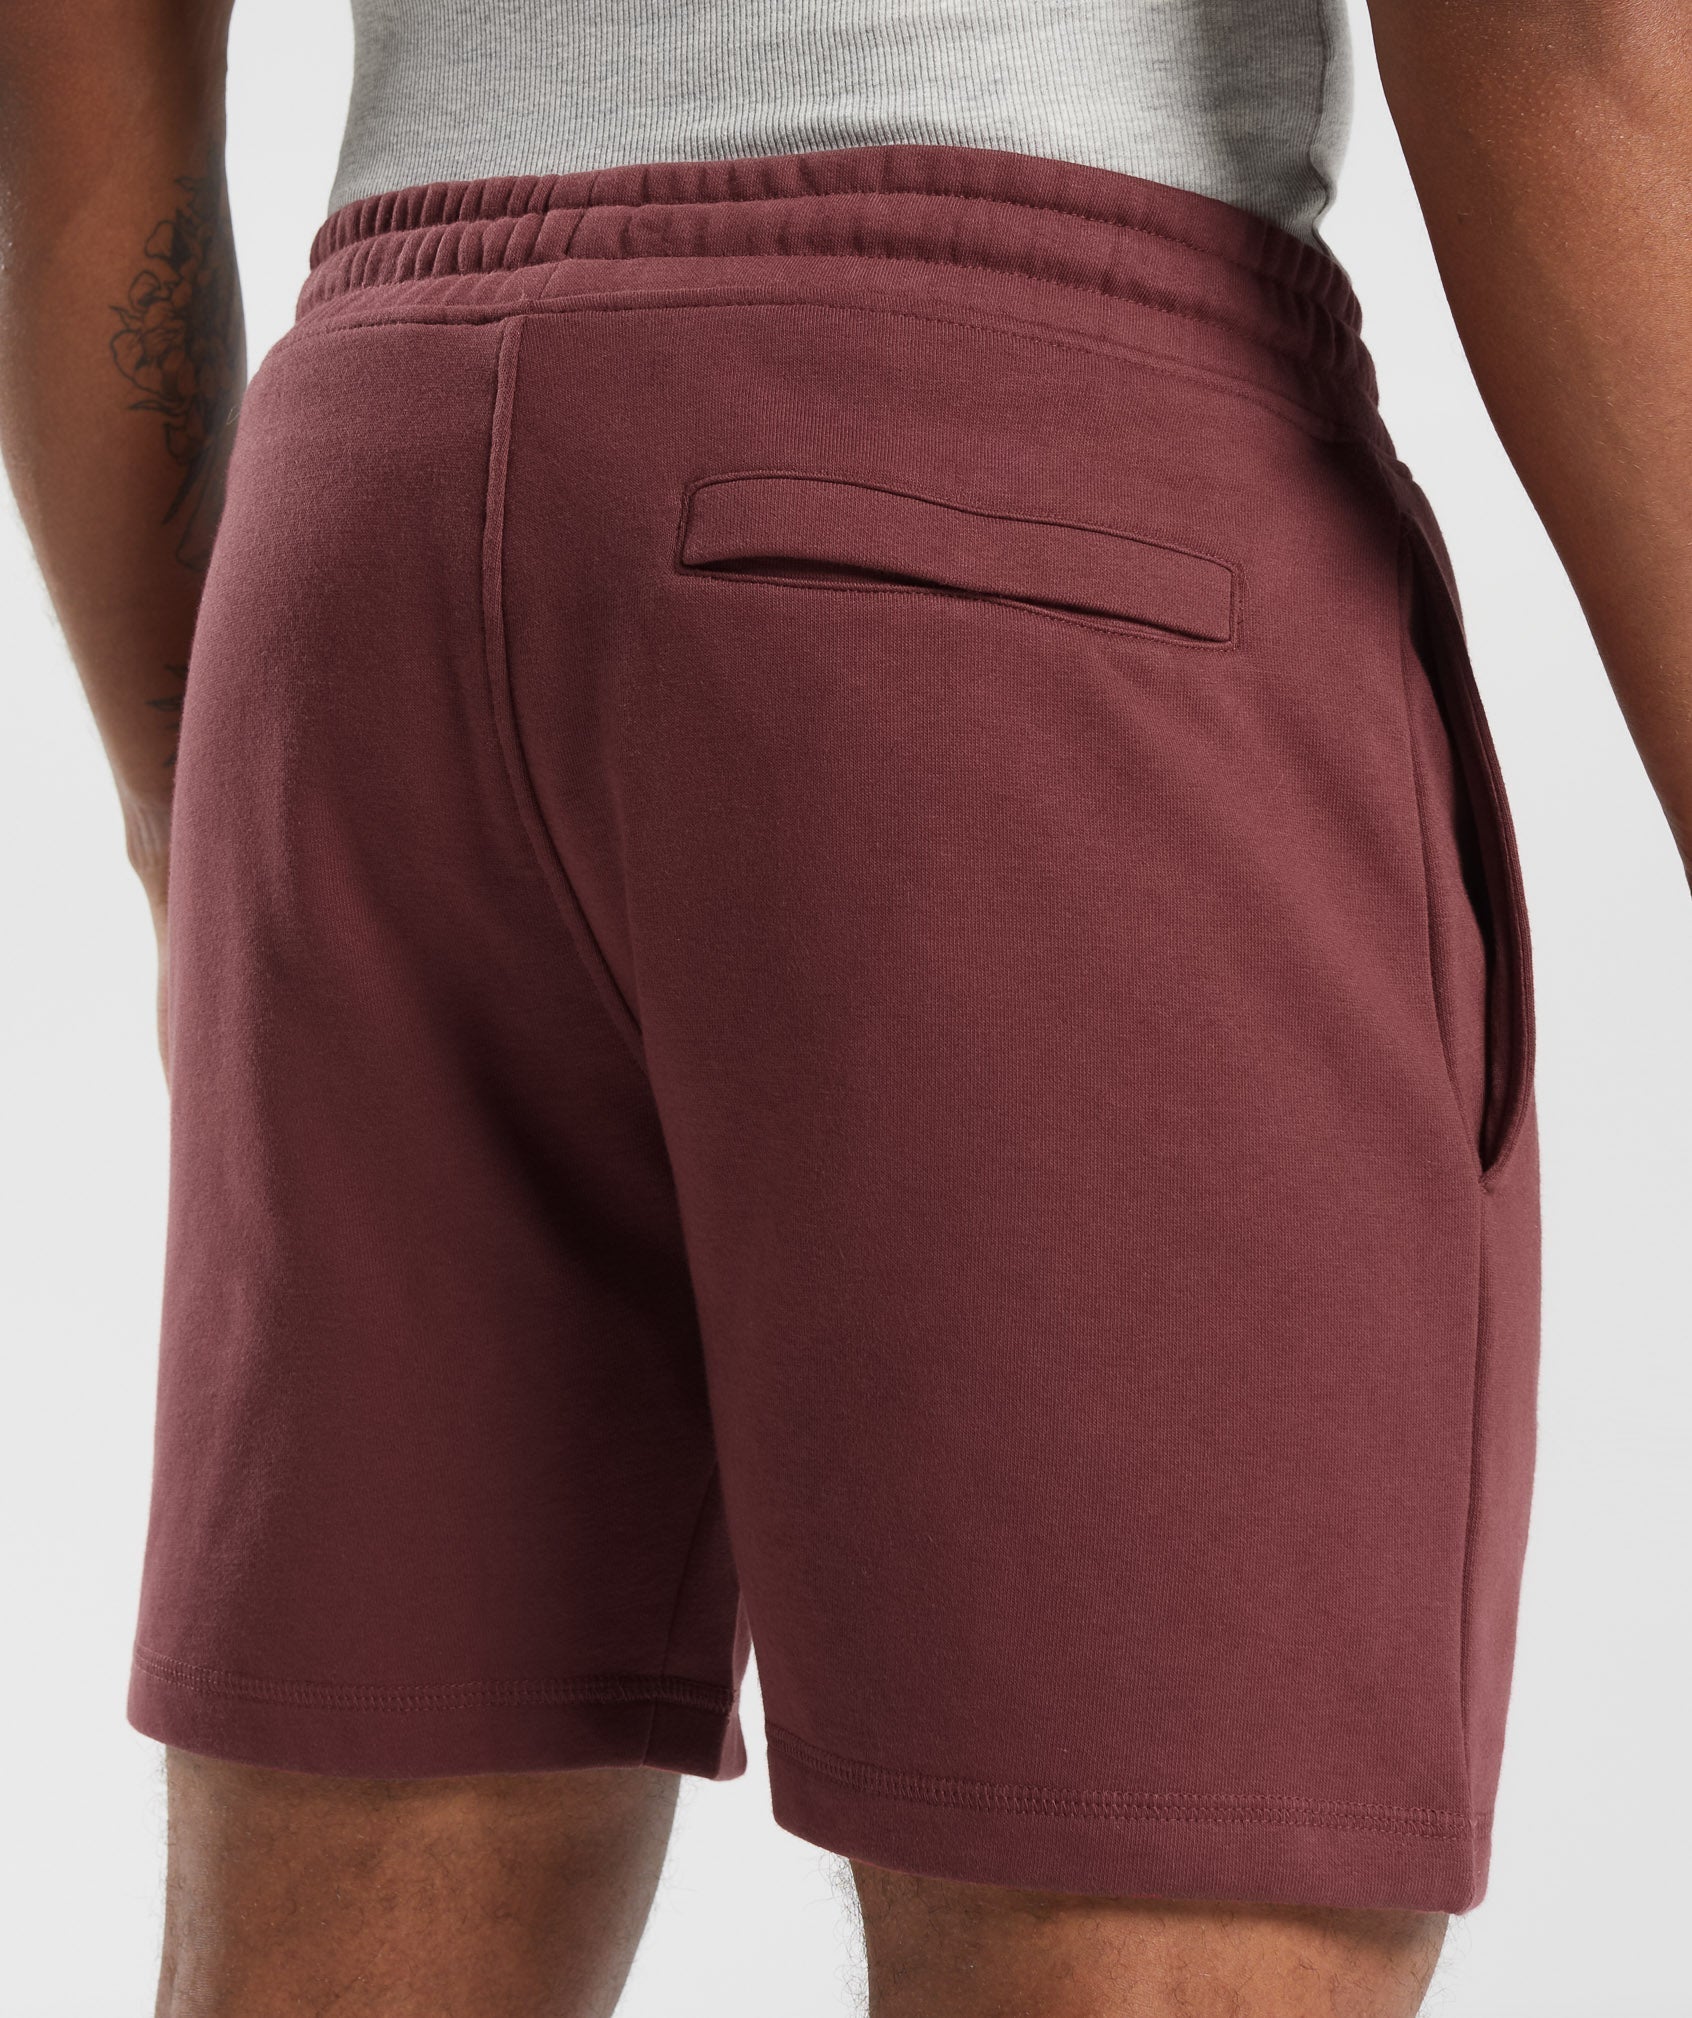 Crest 7" Shorts in Washed Burgundy - view 5